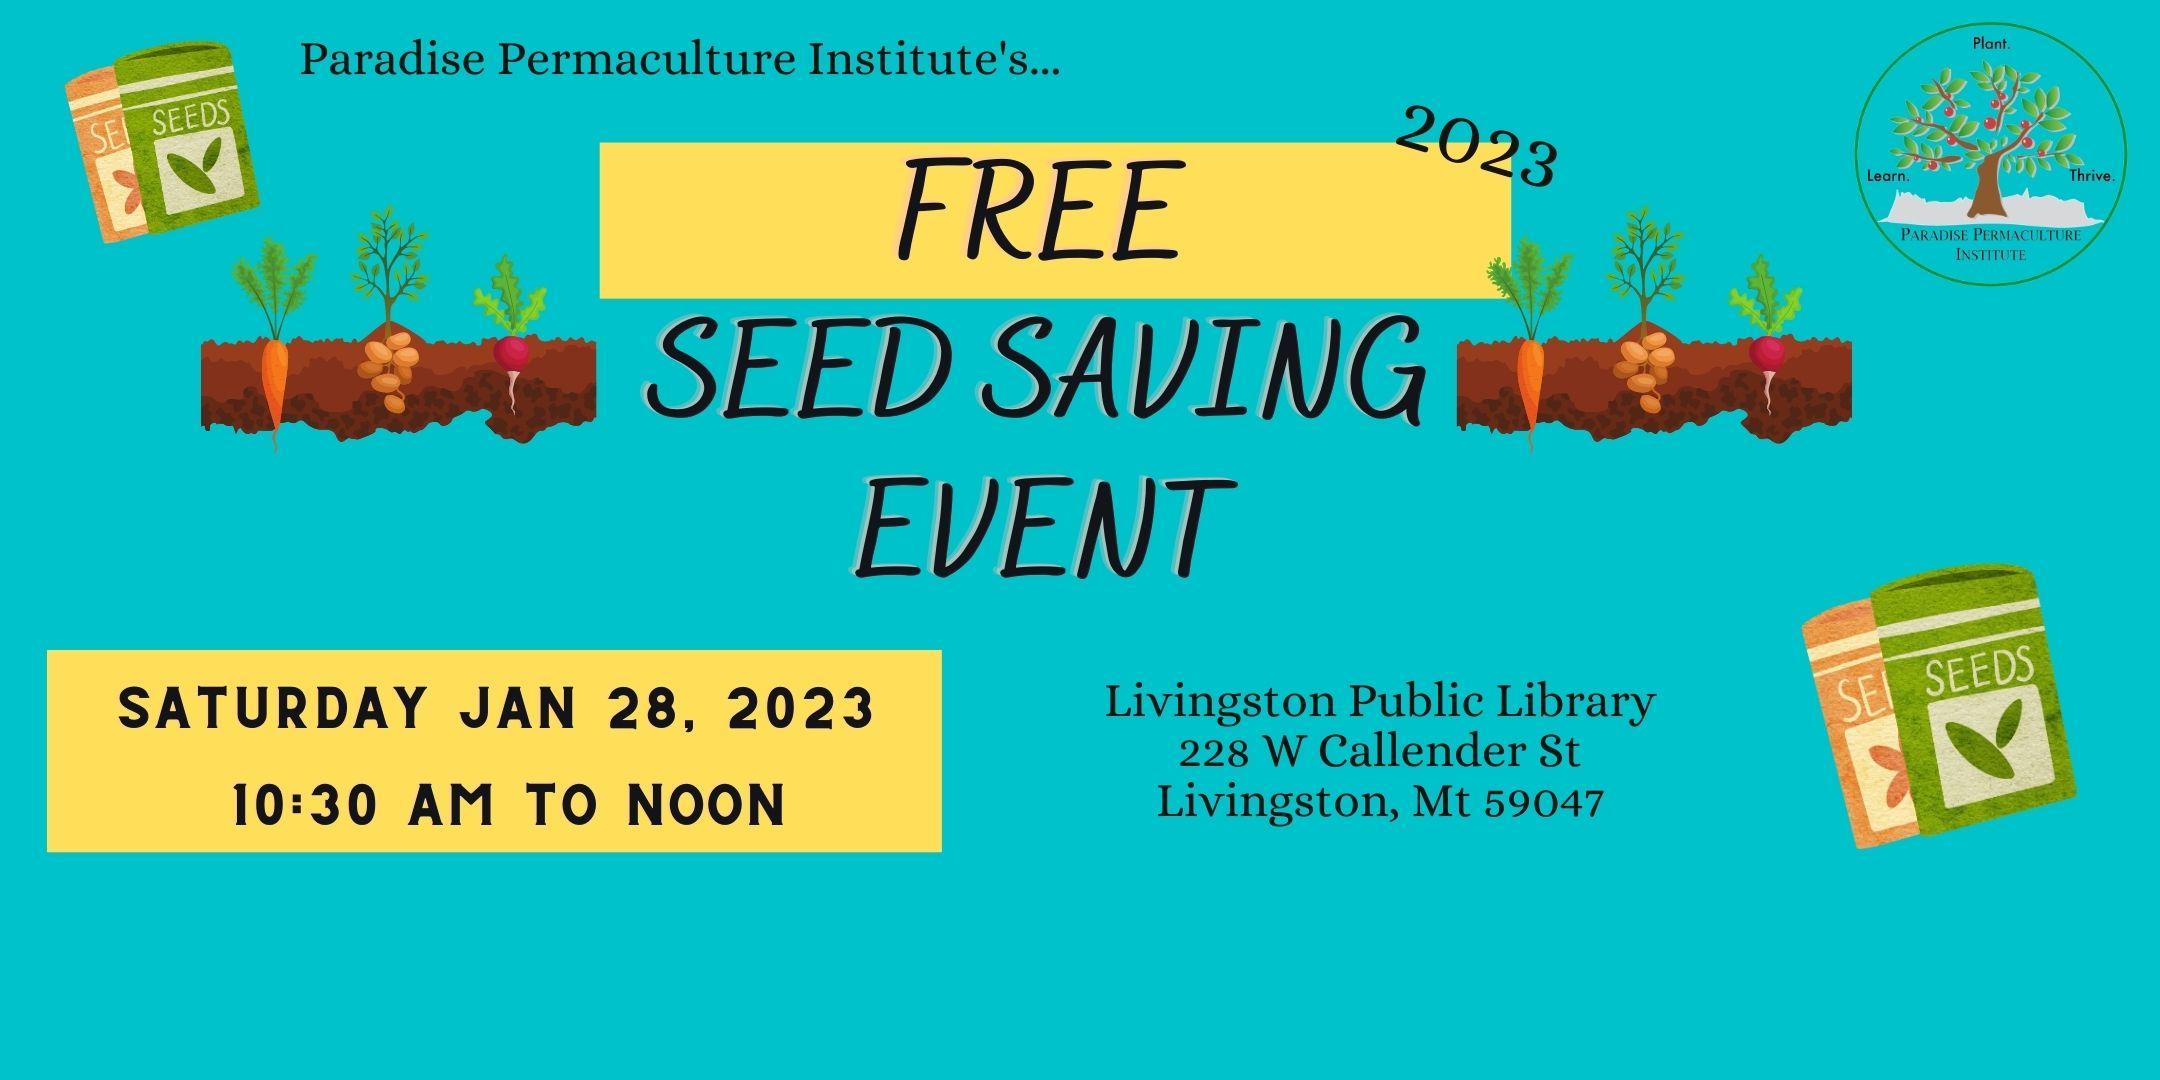 PPI's 2023 Free Seed Saving Event